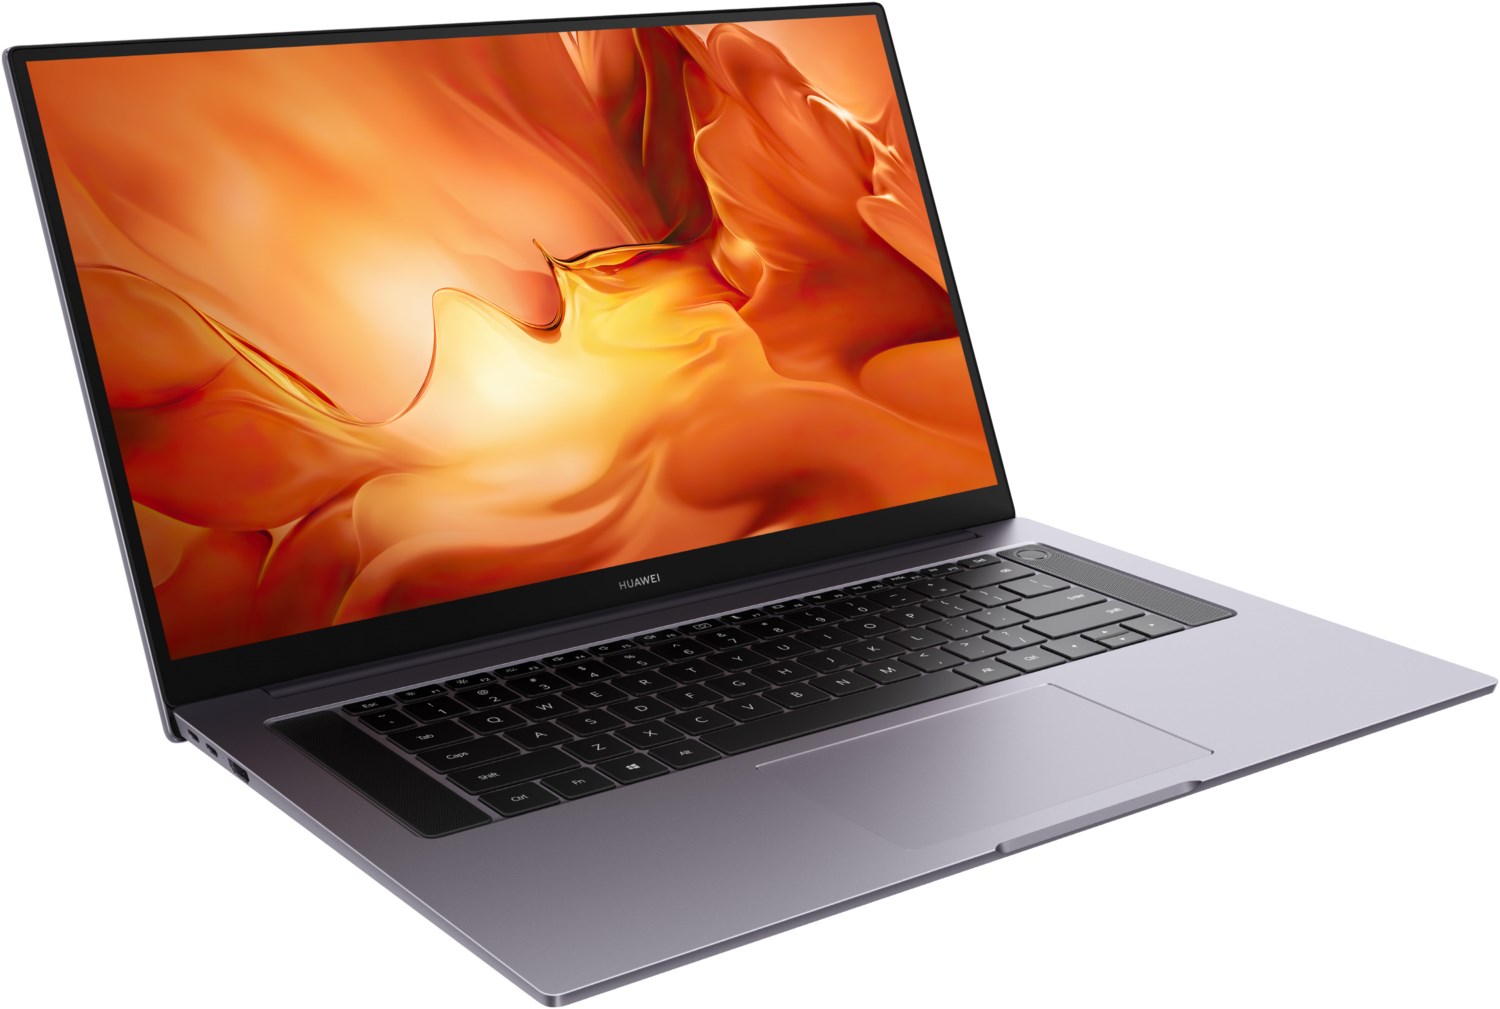 Four things to like about the Huawei Matebook D16 with Intel core i5